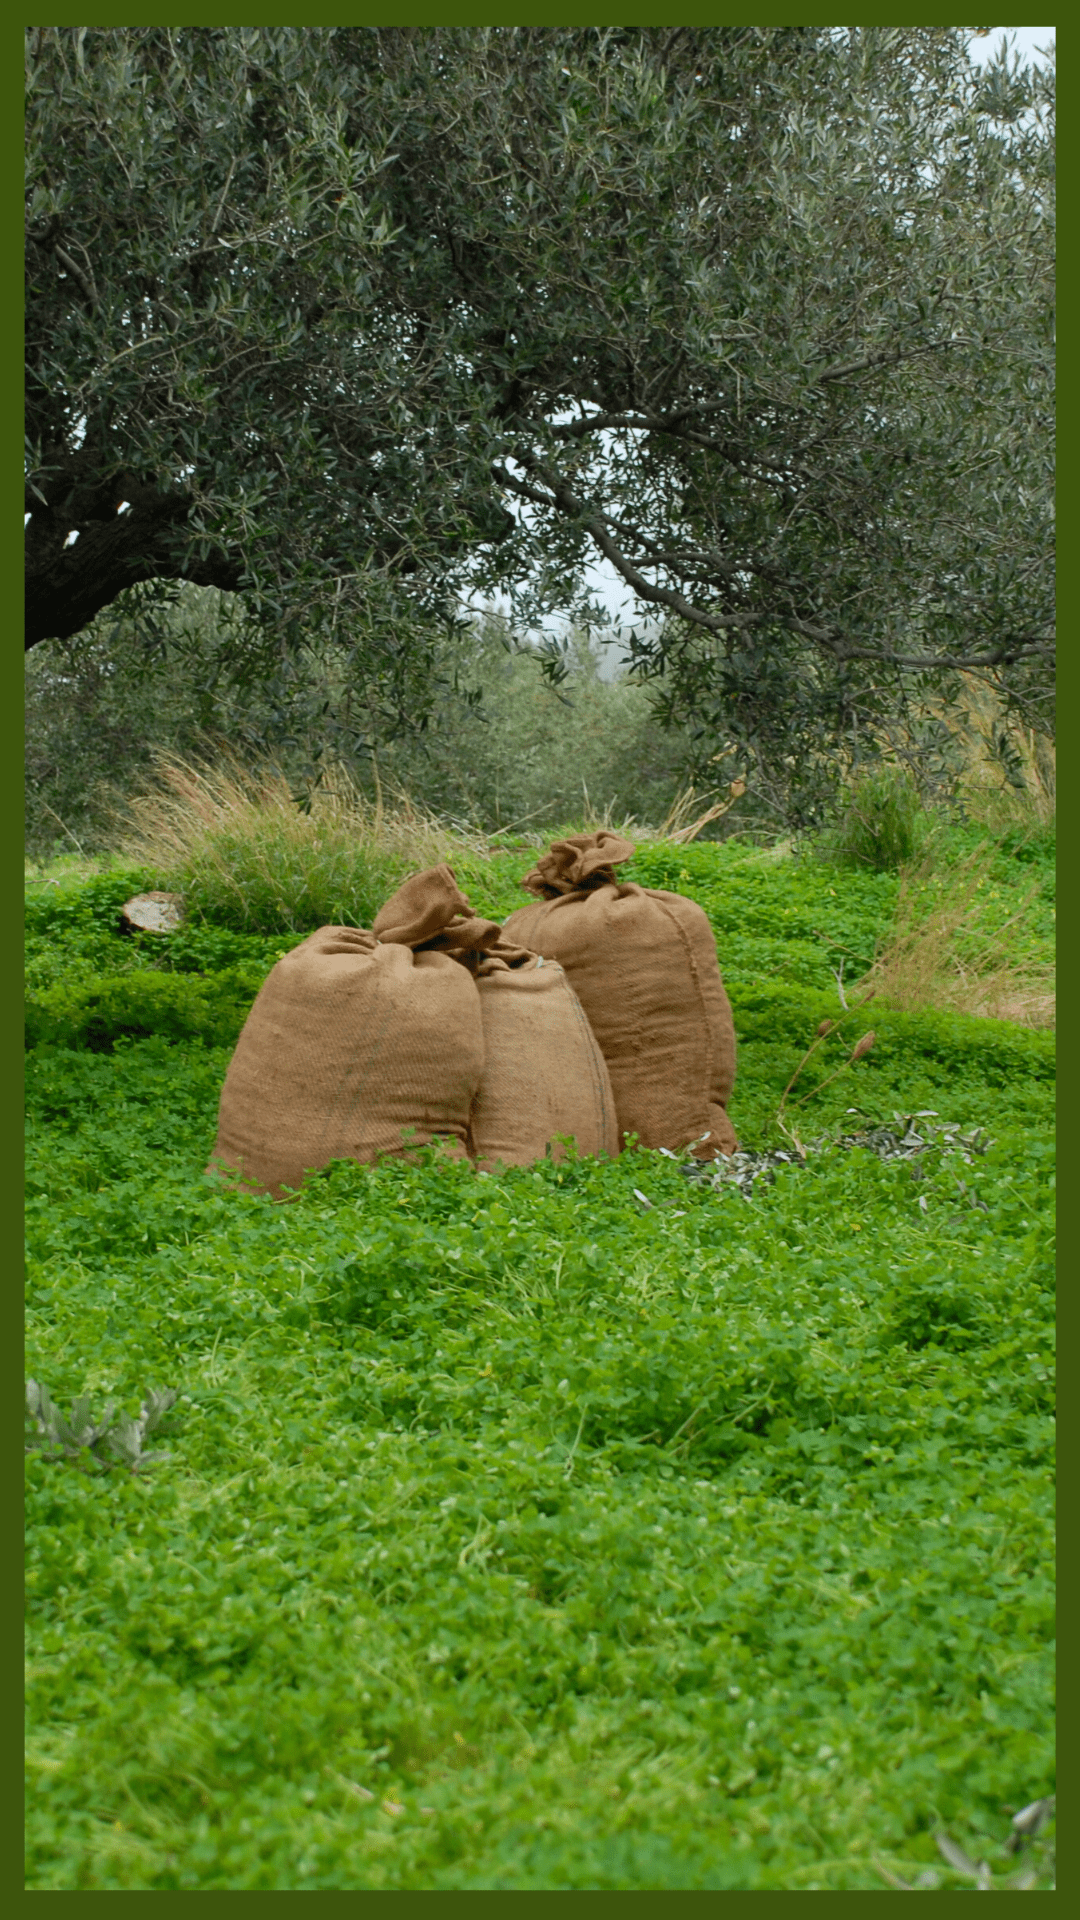 Olive Oil Harvest in Crete/three sacks with olives